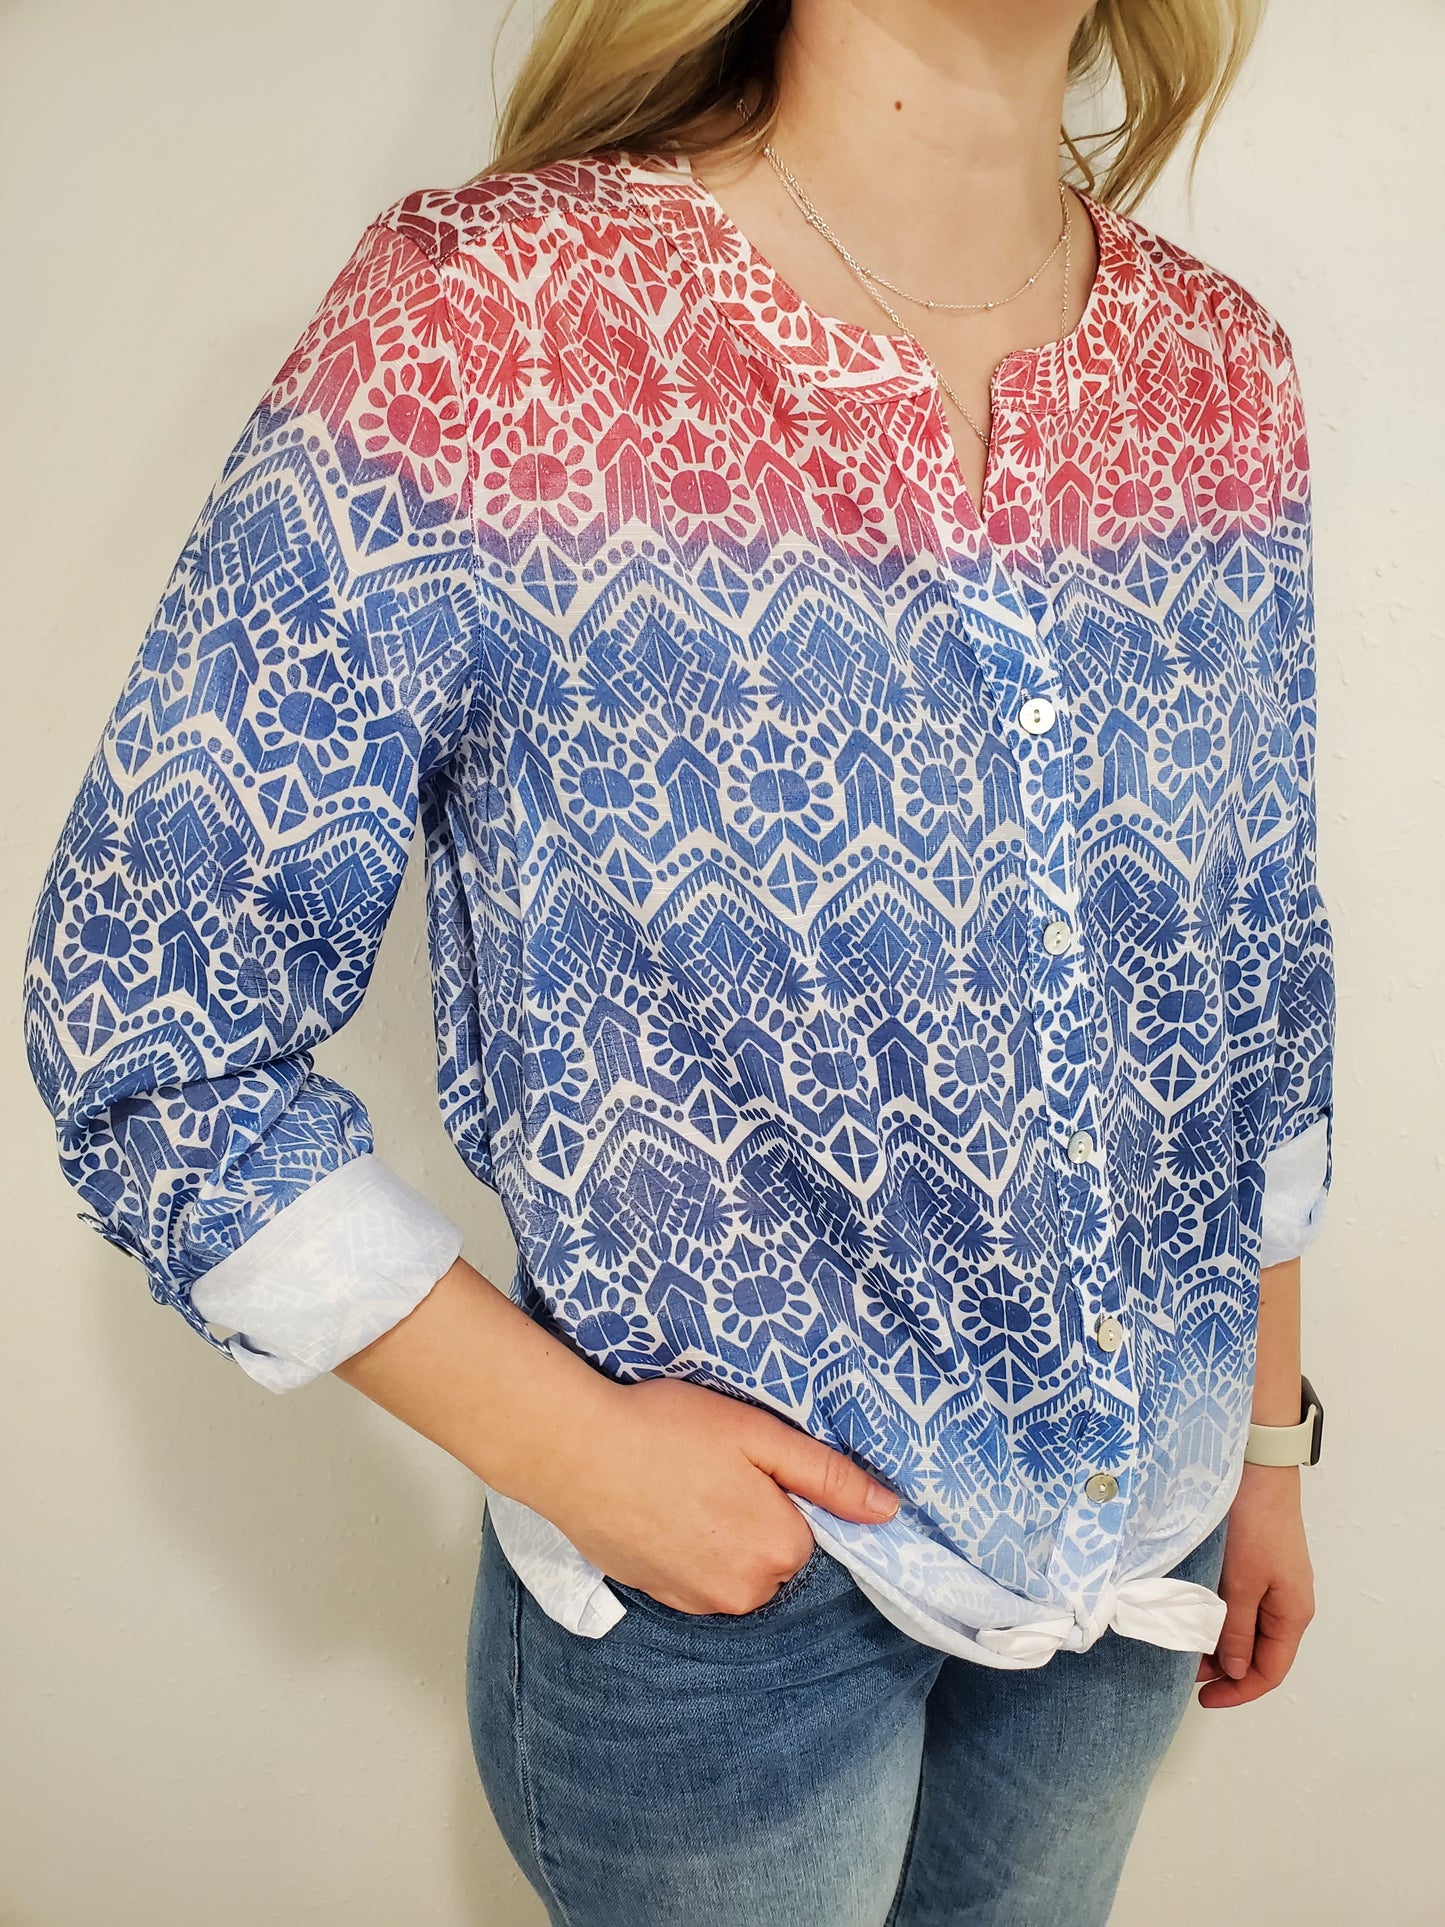 AMERICANA PRINTED BLOUSE - RED/WHITE/BLUE